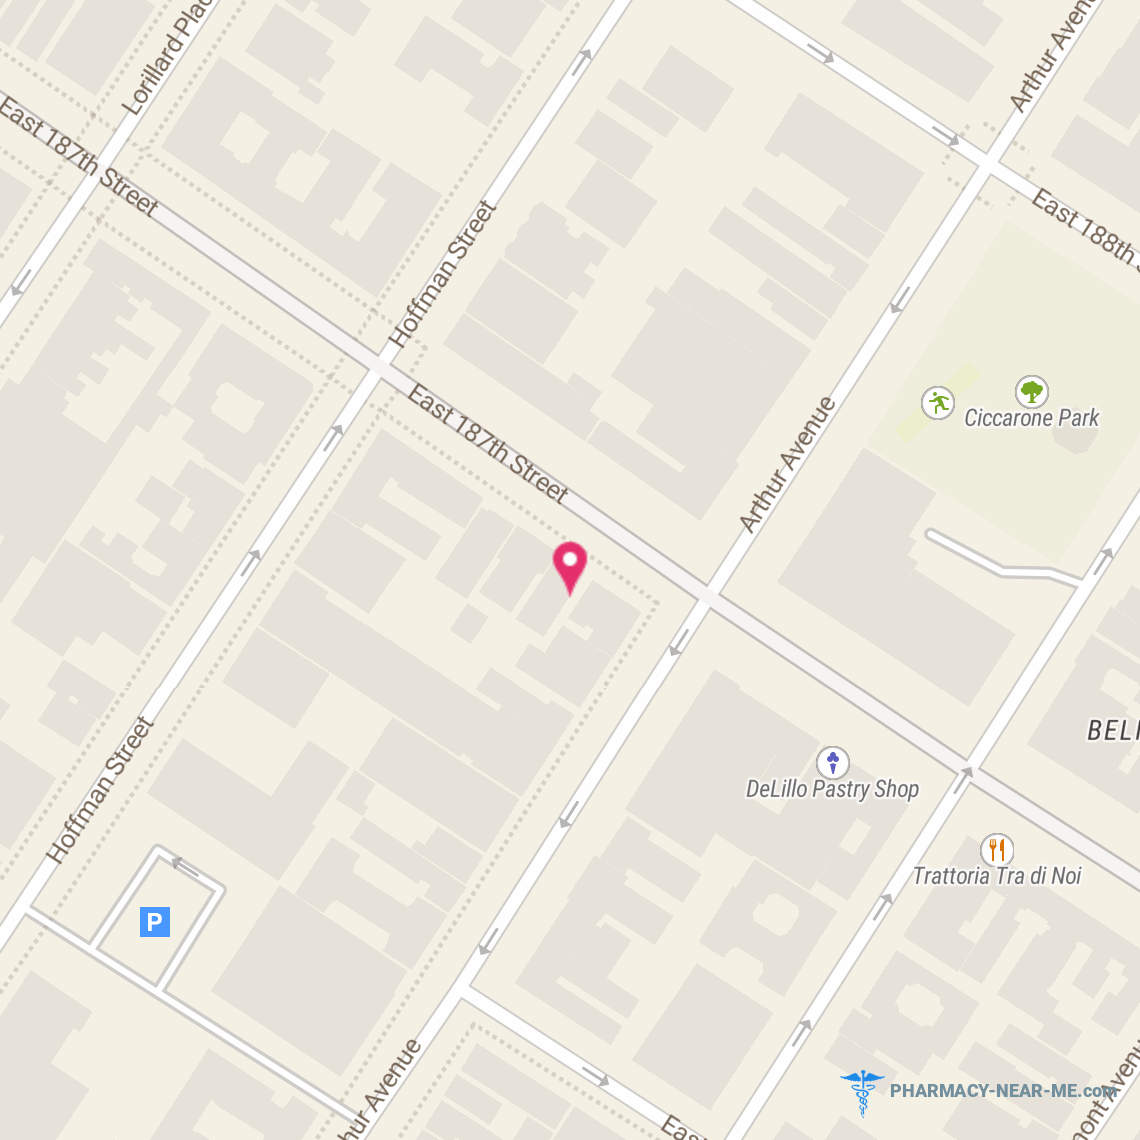 BRONX DRUGS - Pharmacy Hours, Phone, Reviews & Information: 586 East 187th Street, Bronx, New York 10458, United States